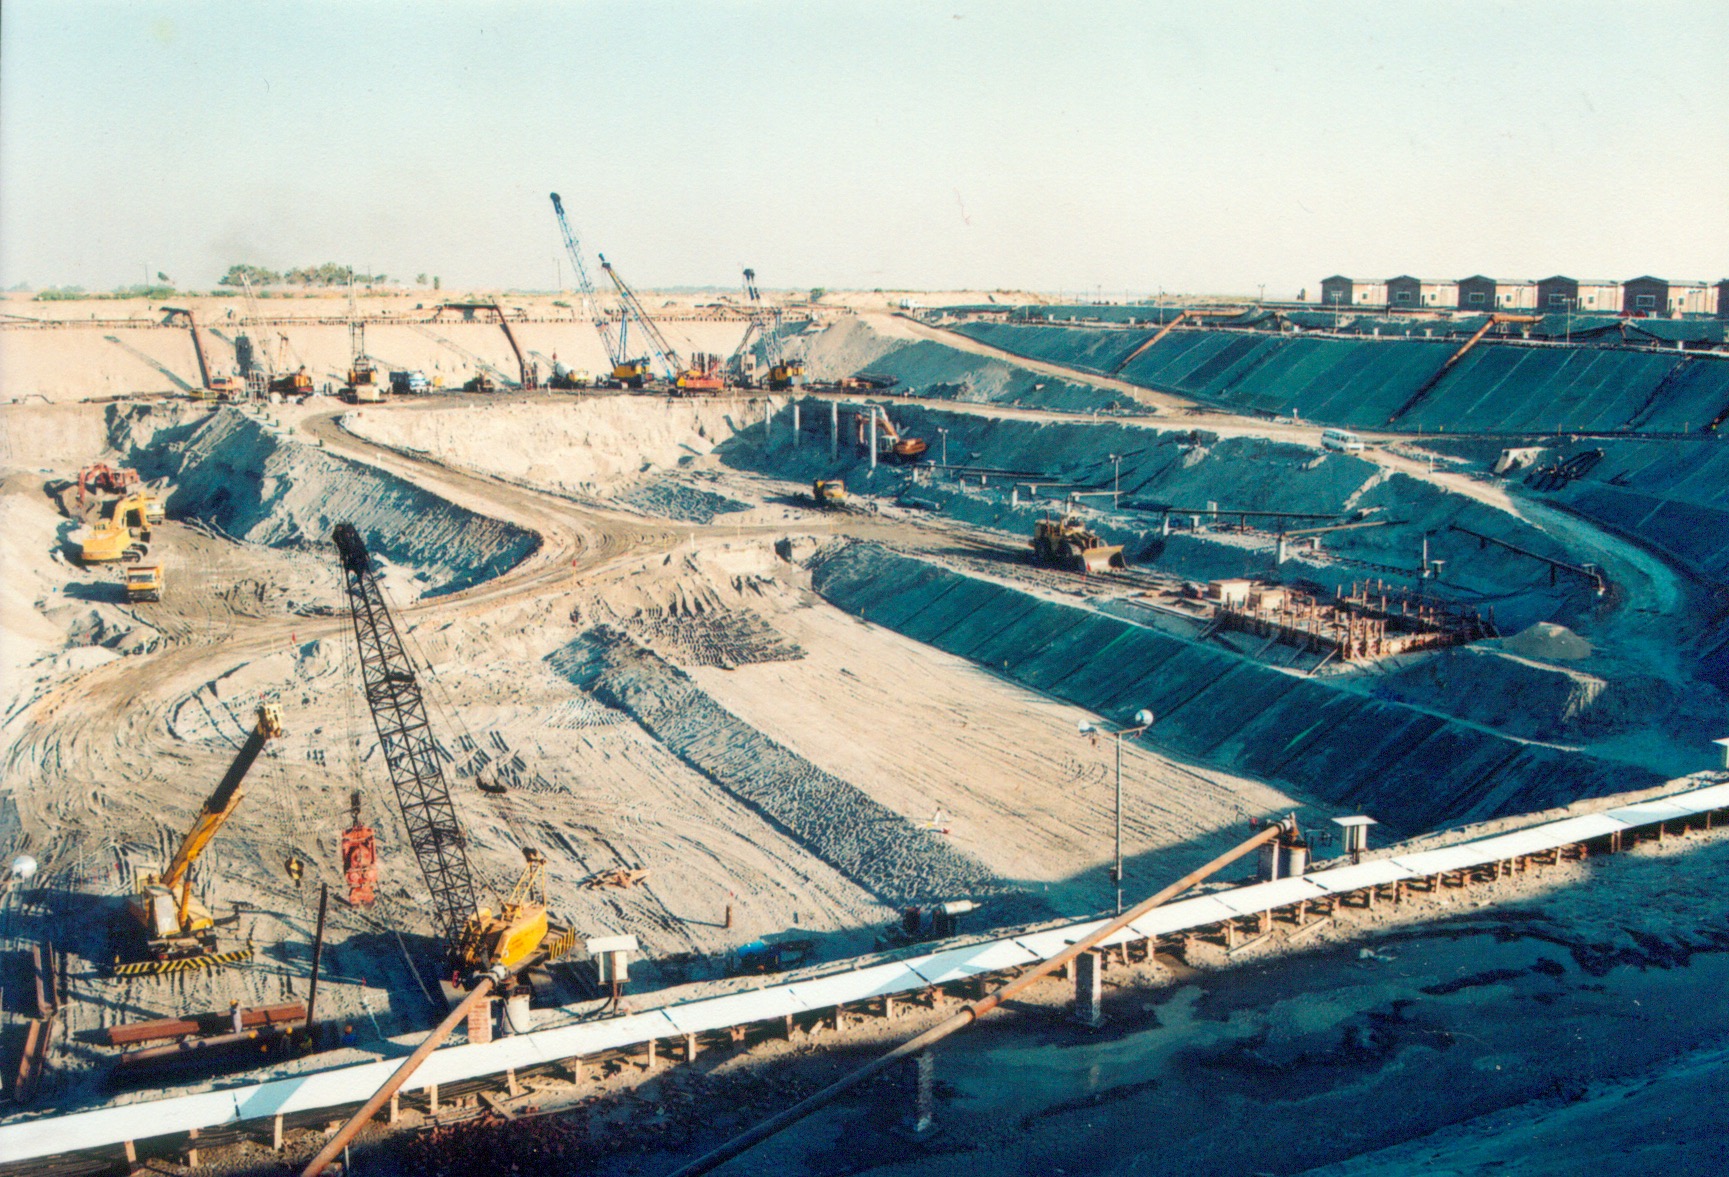 Dewatering at Chashma Barrage The biggest dewatering project in the world